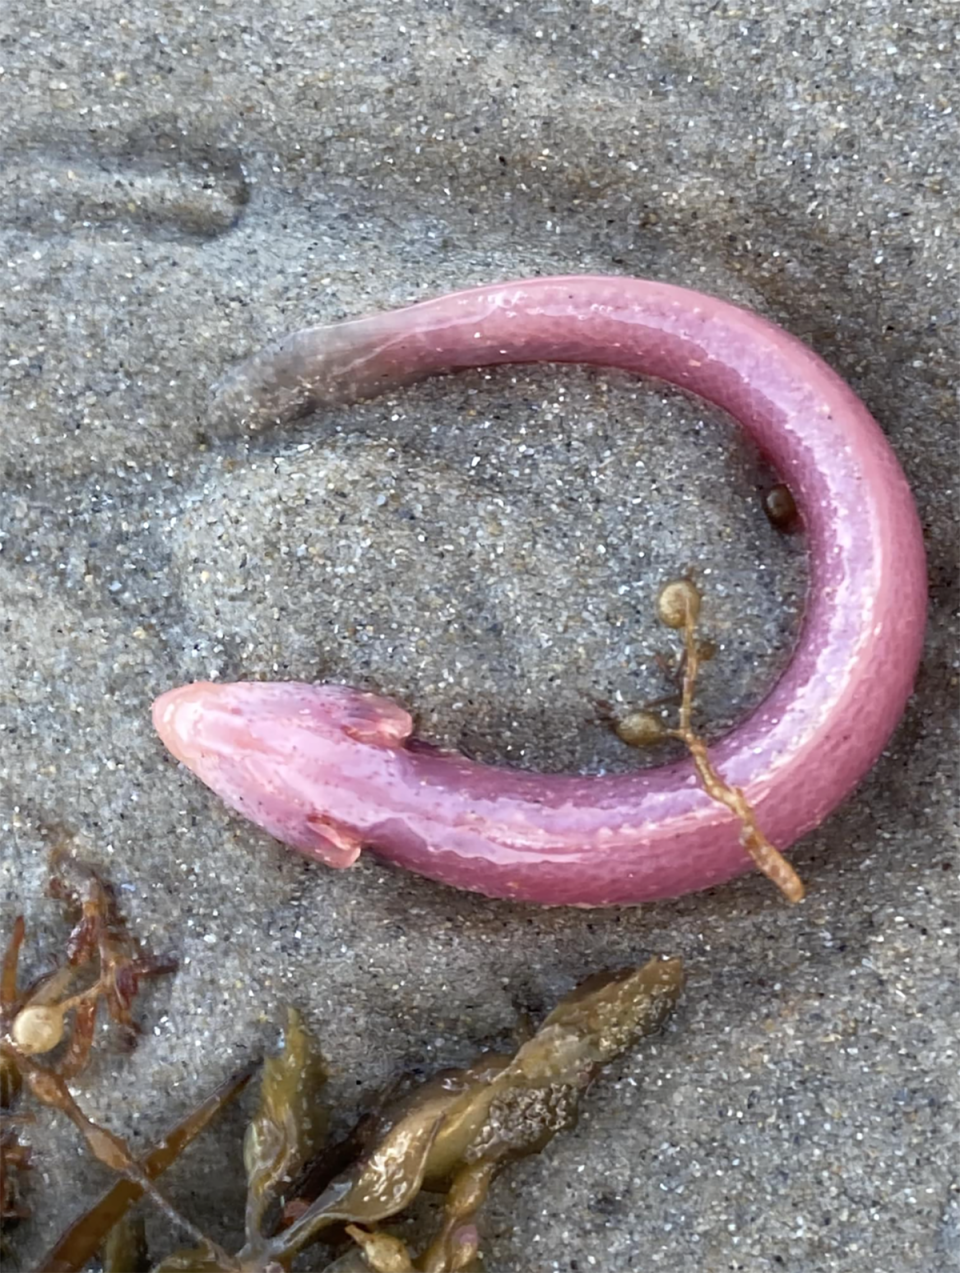 The bright pink bling goby fish washed up on the beach.